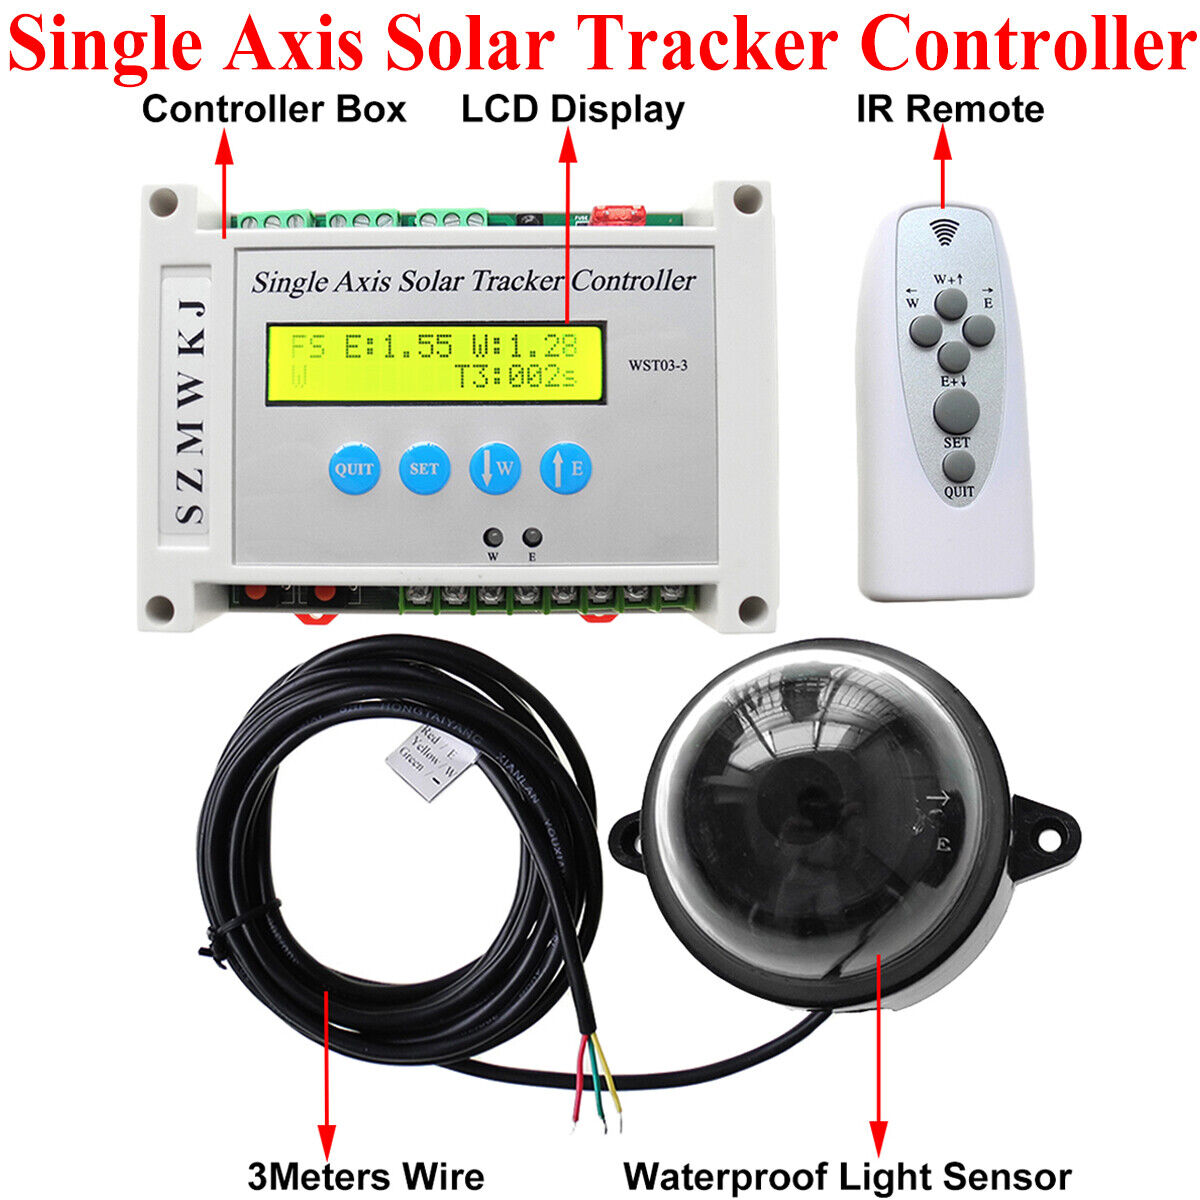 DC Electric Single Axis Solar Tracker Controller &Linear Actuator Anemometer Kit